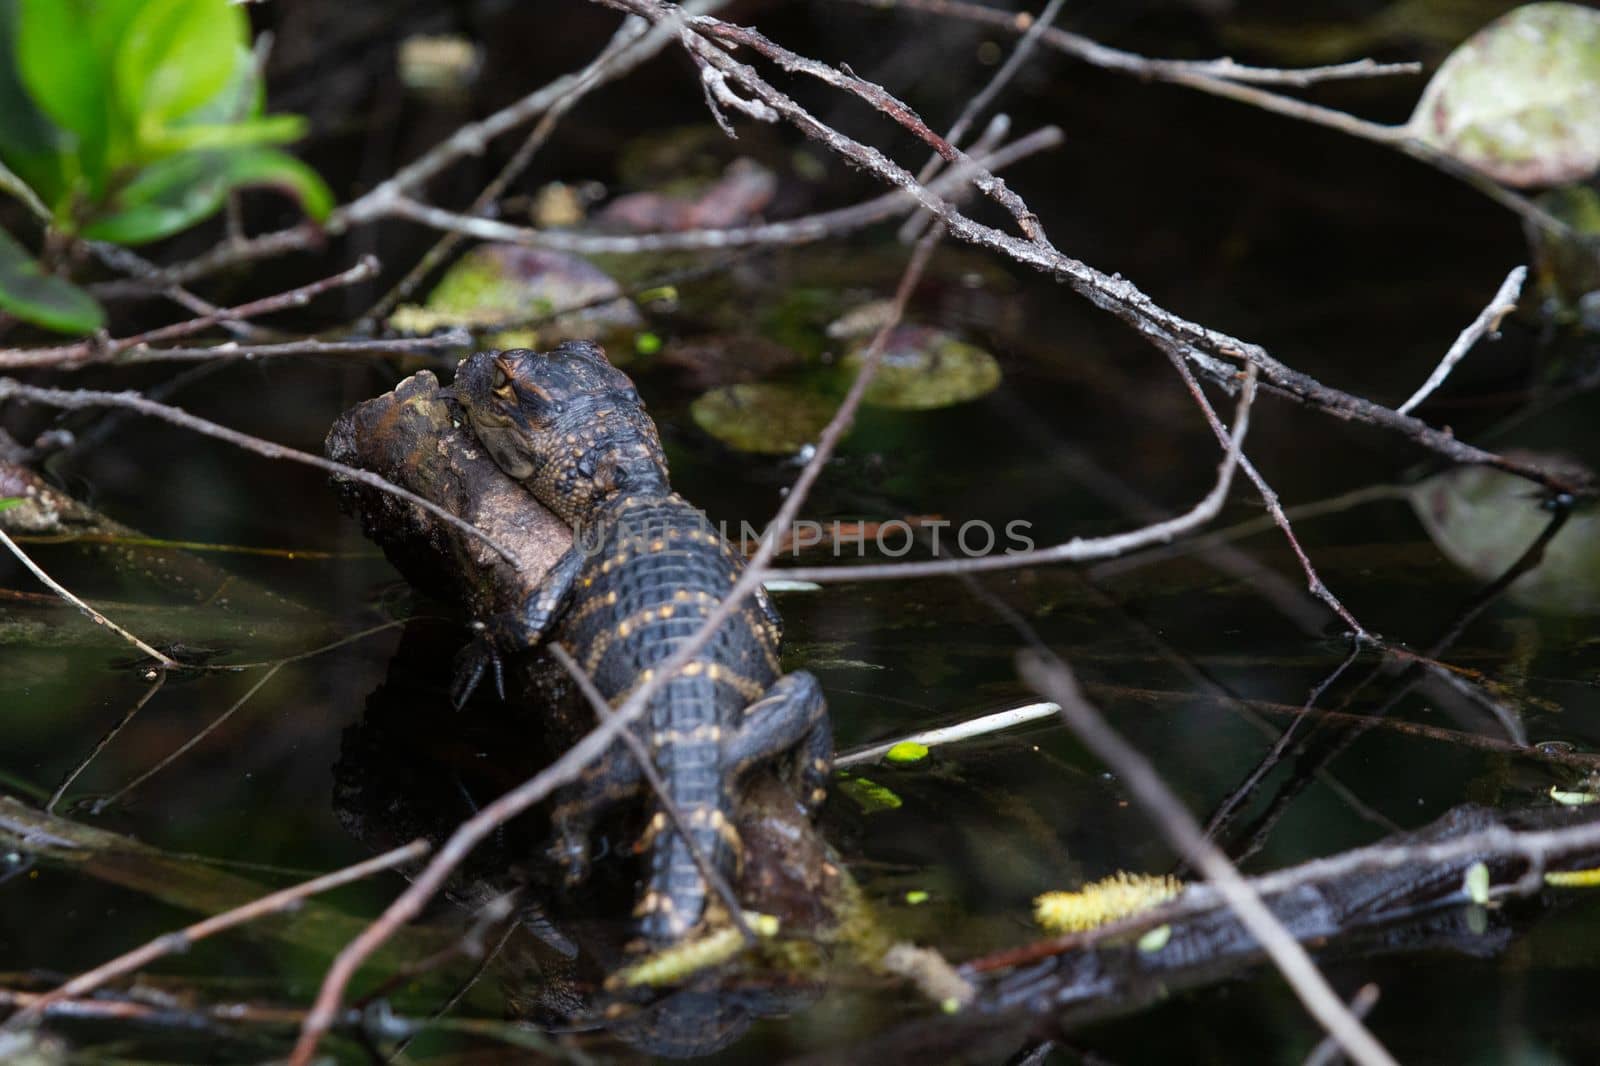 A young American alligator hiding between plants and sleeping, Florida, United States